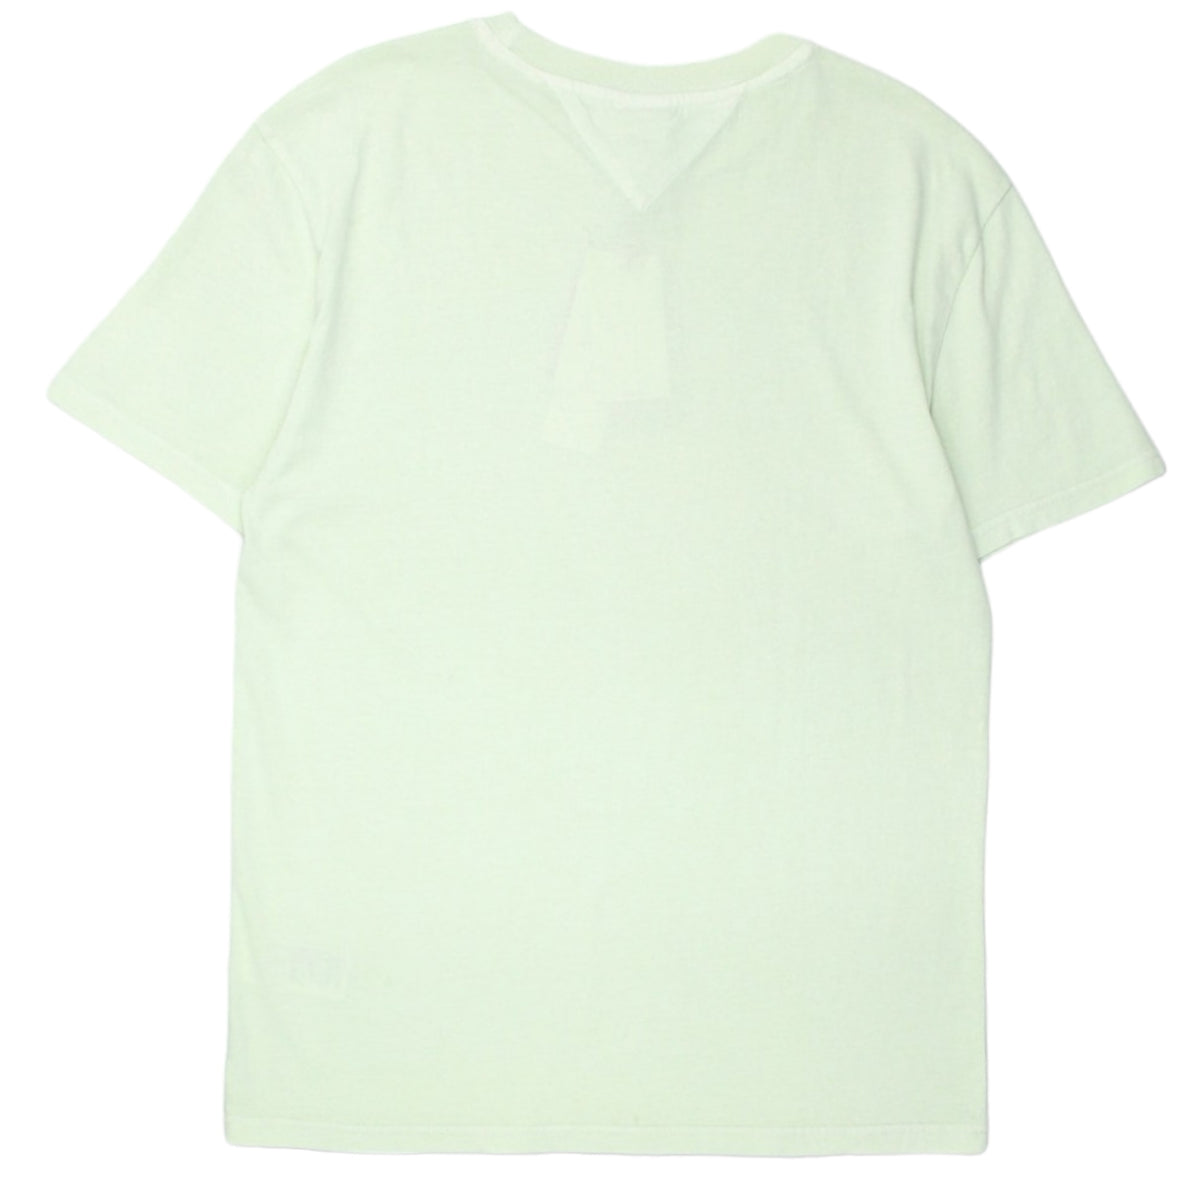 Tommy Jeans Mint Arched Logo Tee